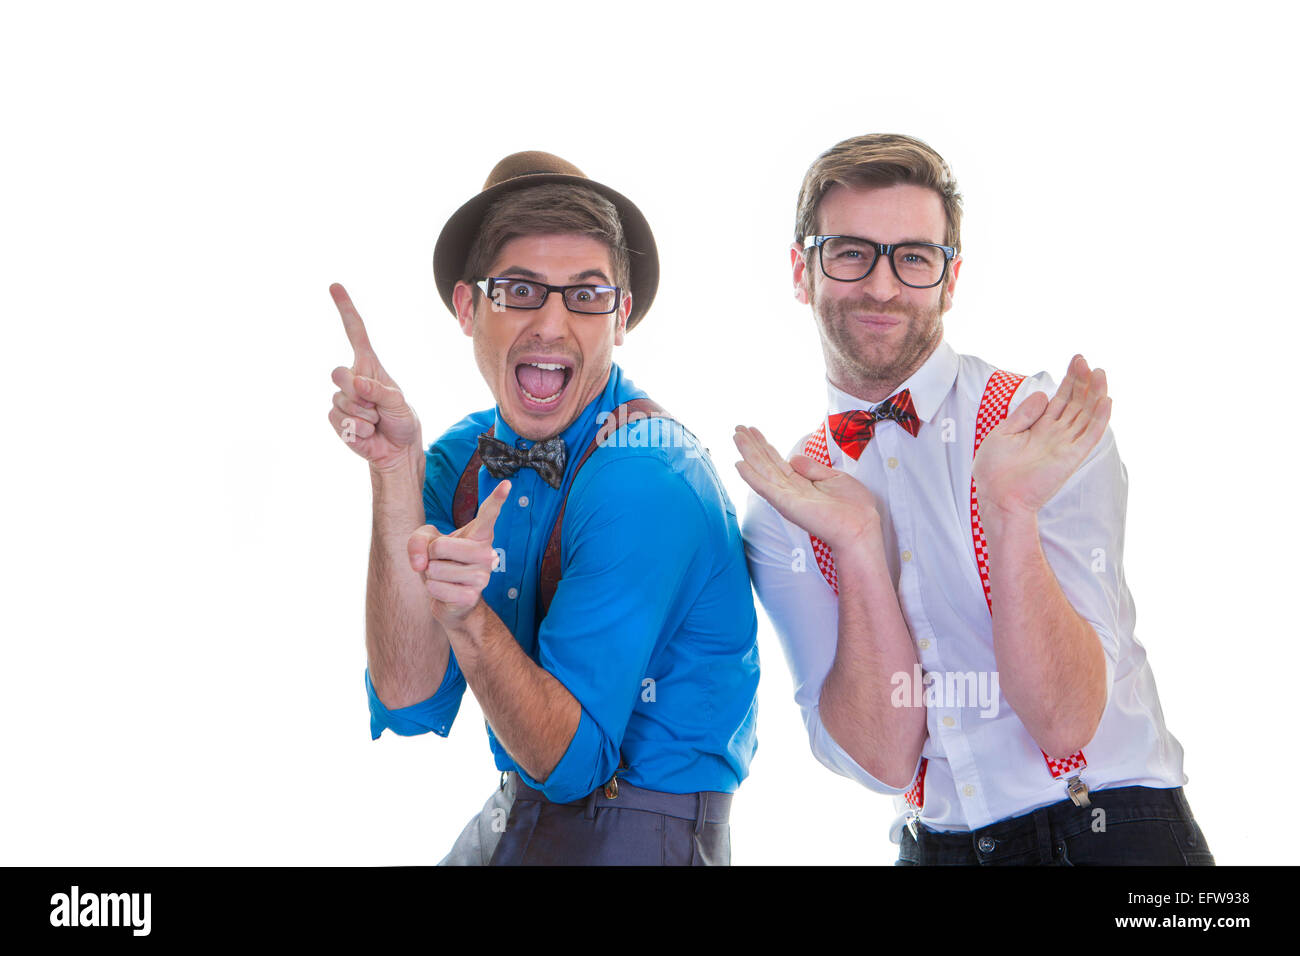 goofy business men with glasses,  hat, braces, suspenders and bow ties. Stock Photo